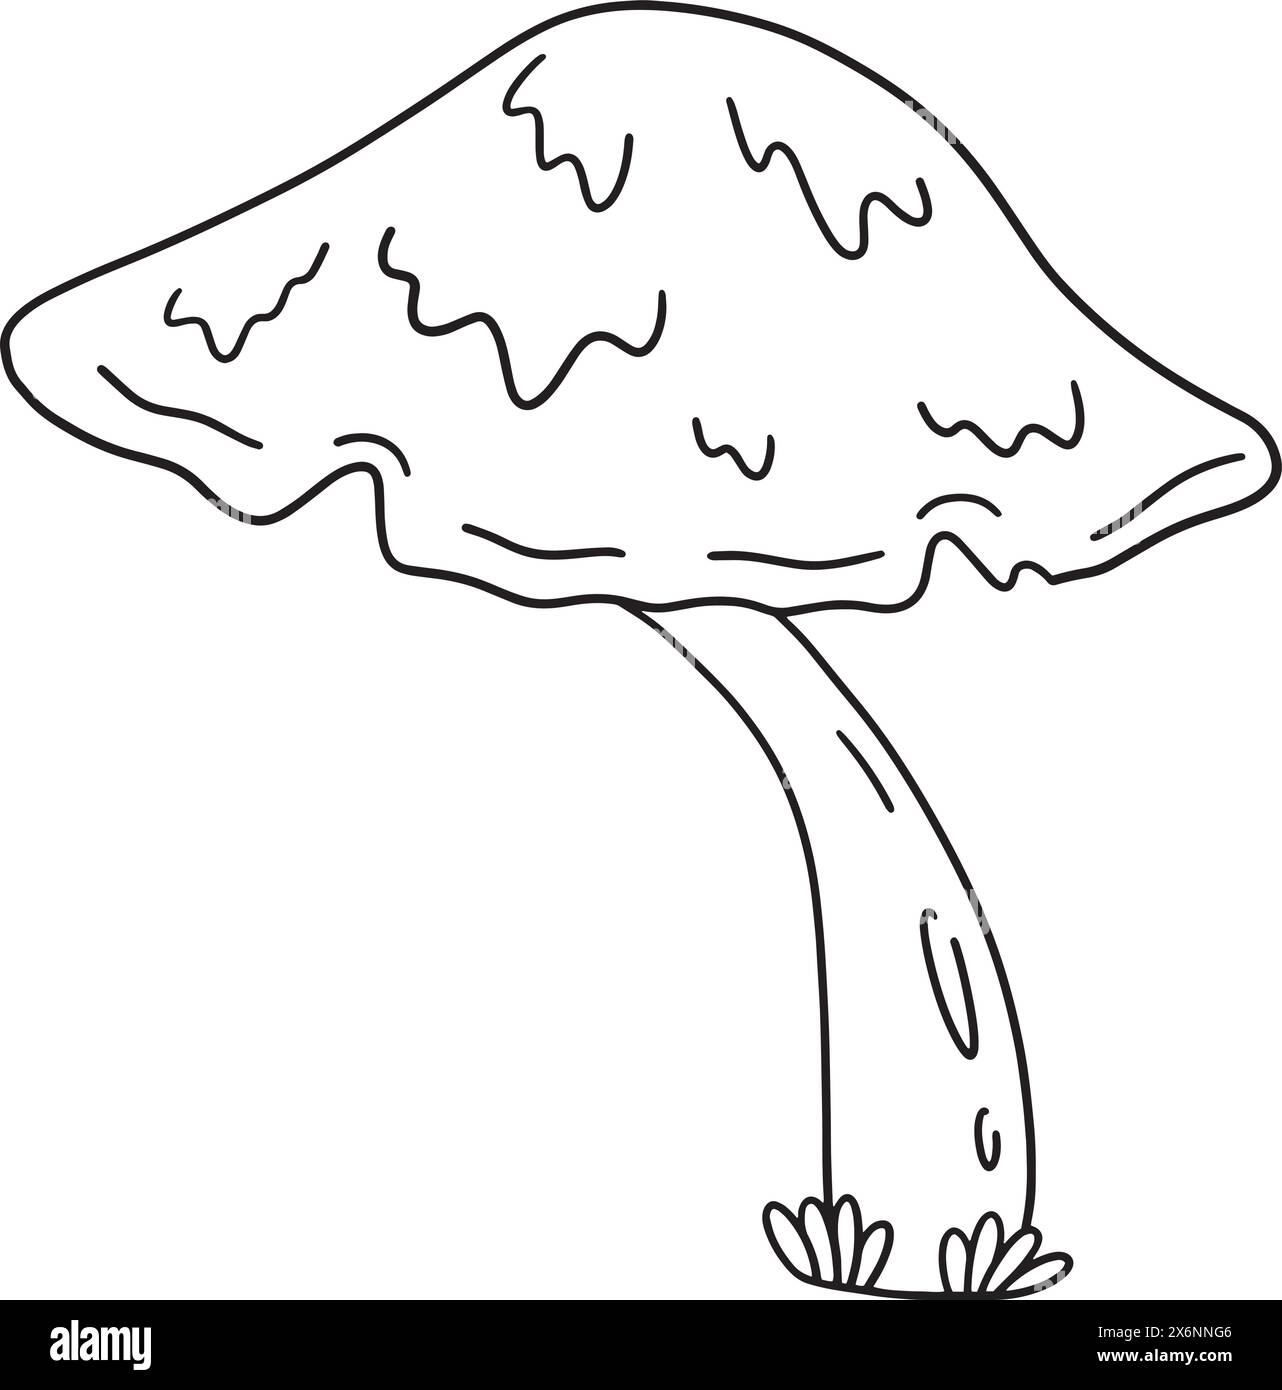 Giant Mushroom Isolated Coloring Page for Kids Stock Vector